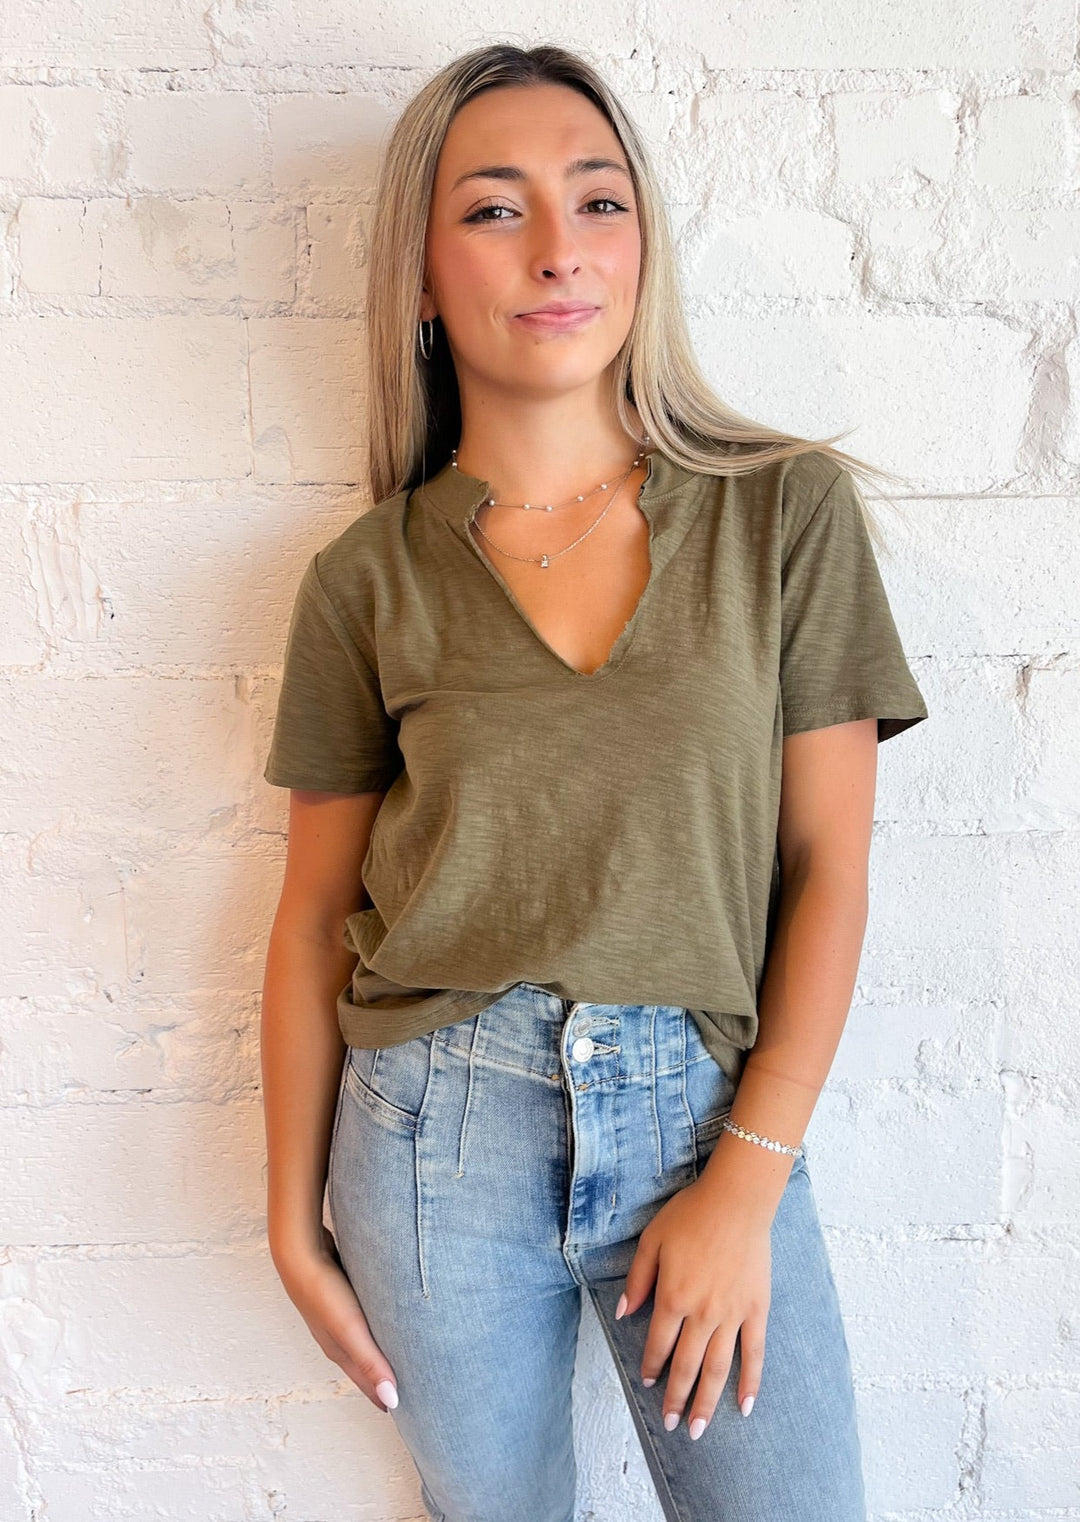 Plata Notched Tee, Tops, Adeline, Adeline, dallas boutique, dallas texas, texas boutique, women's boutique dallas, adeline boutique, dallas boutique, trendy boutique, affordable boutique